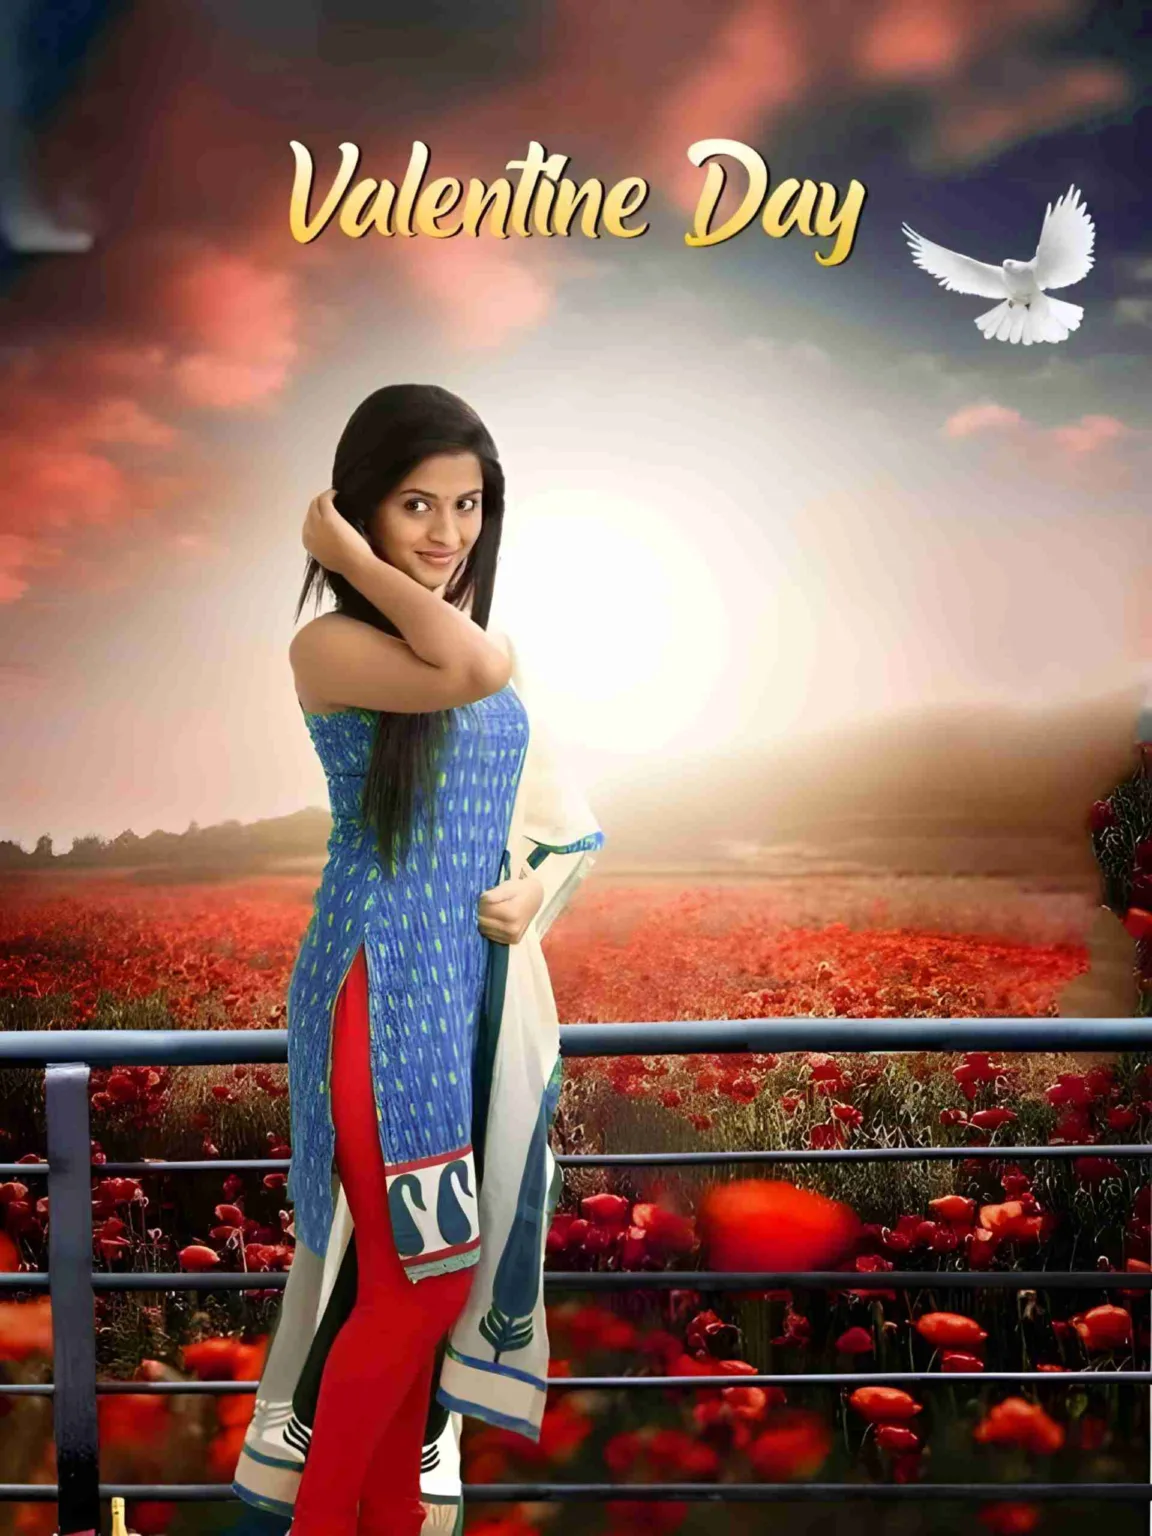 Valentine Day Cb Background with cute Girl